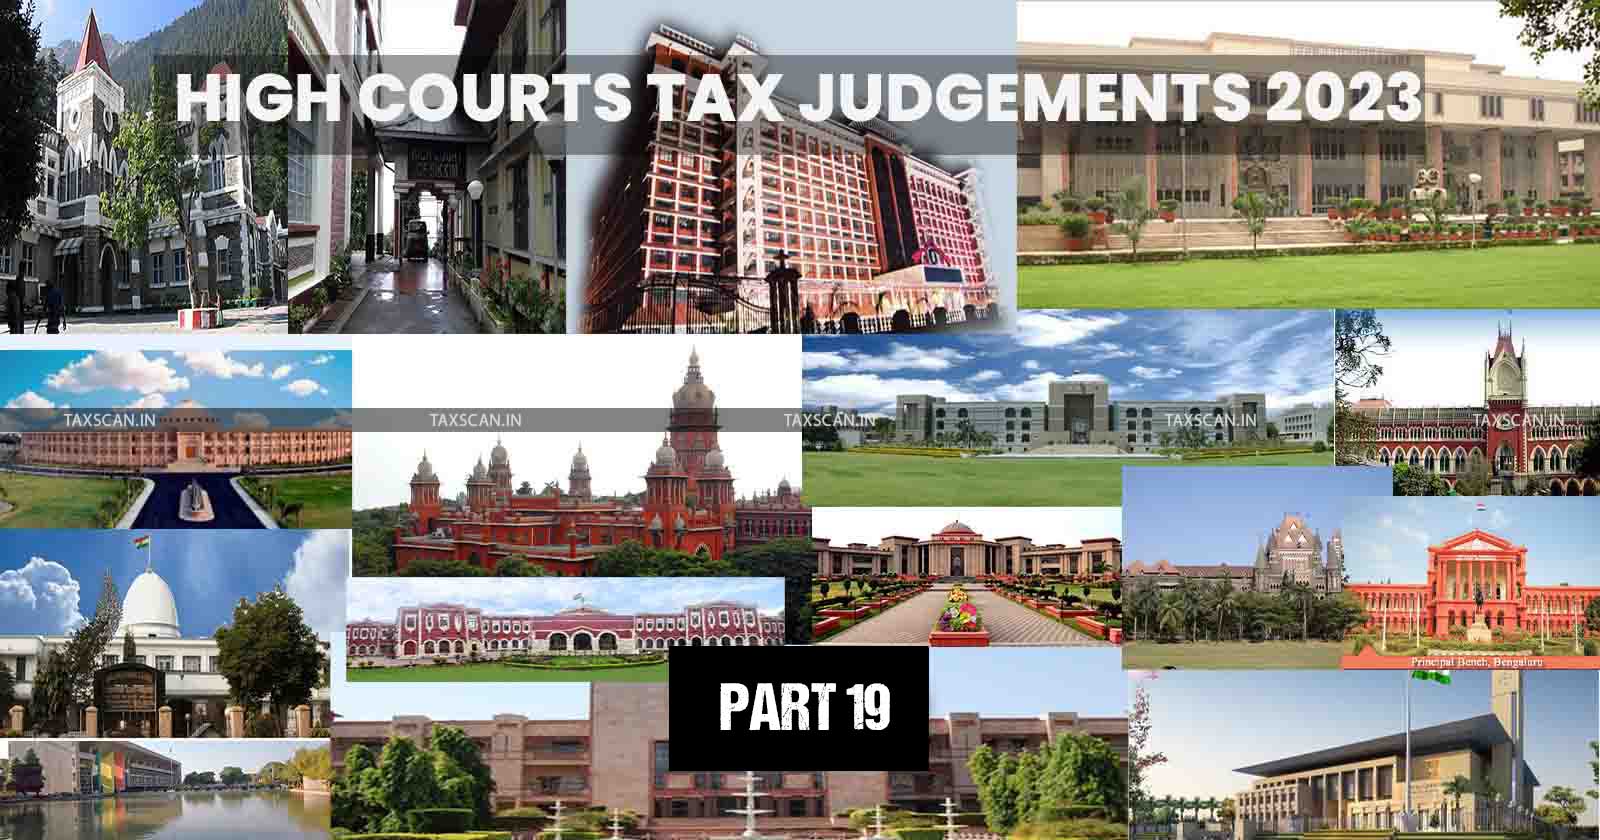 Annual Digest 2023 - Tax Judgment of HC - Judgment of HC Annual Digest - high courts judgments - taxscan annual digest